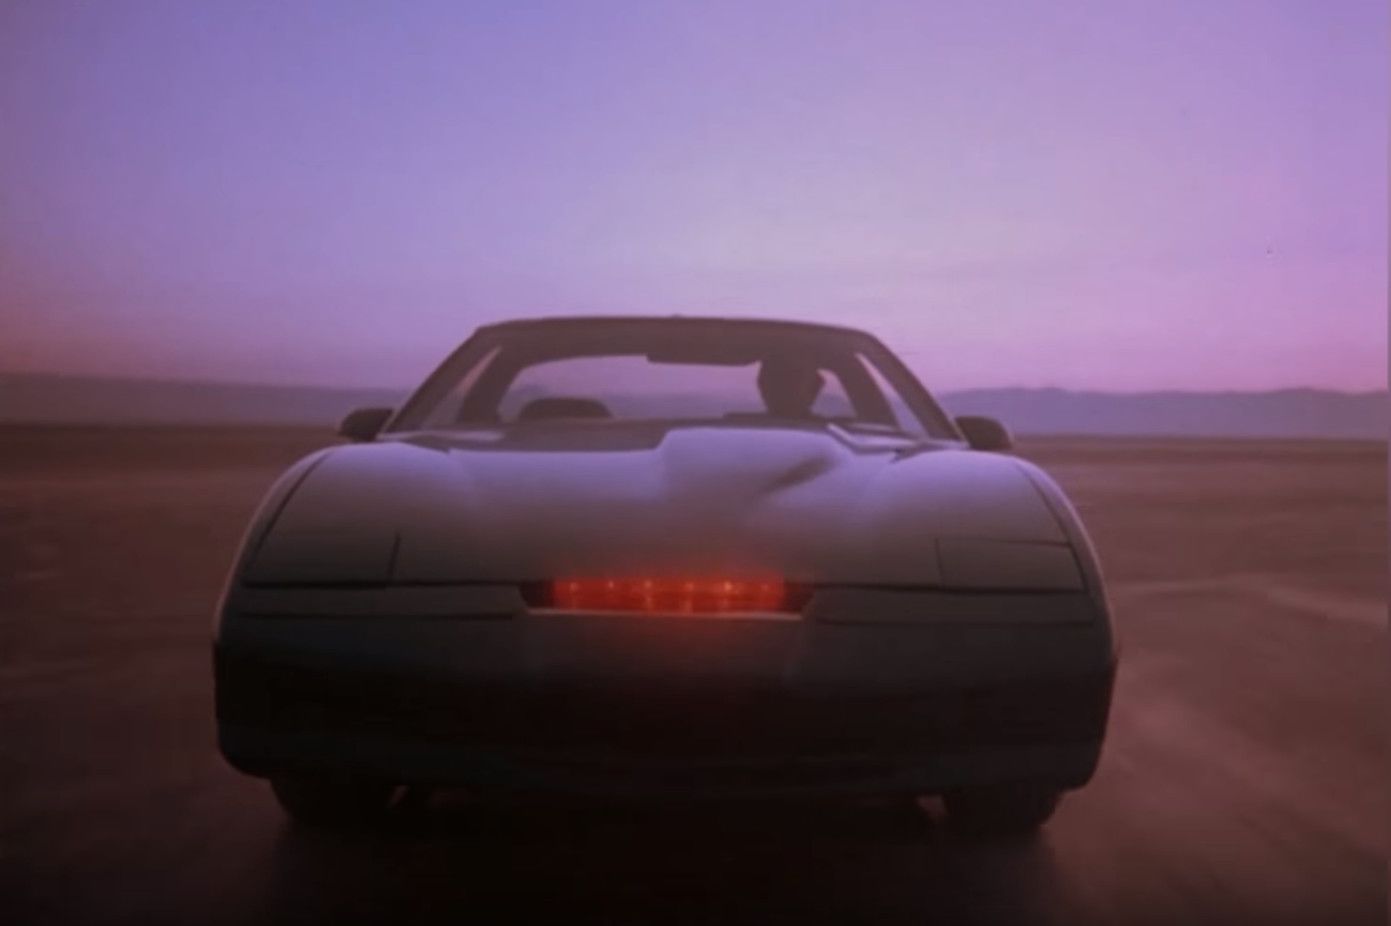 2008 knight rider theme song composer